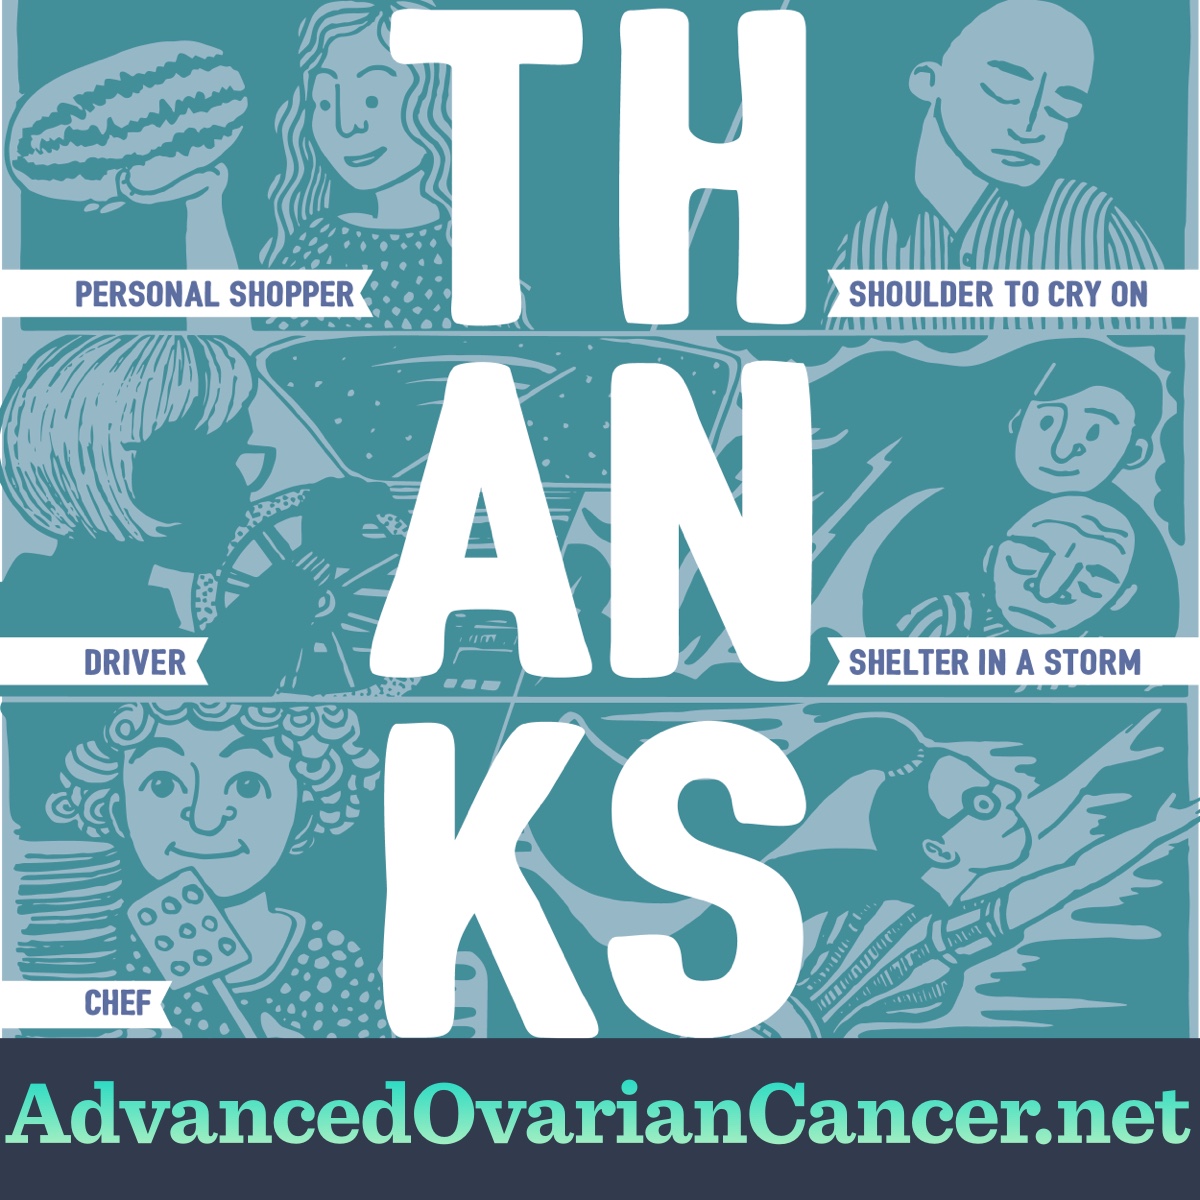 Image saying thank you and showing caregivers helping with driving, shopping, cooking, and comforting